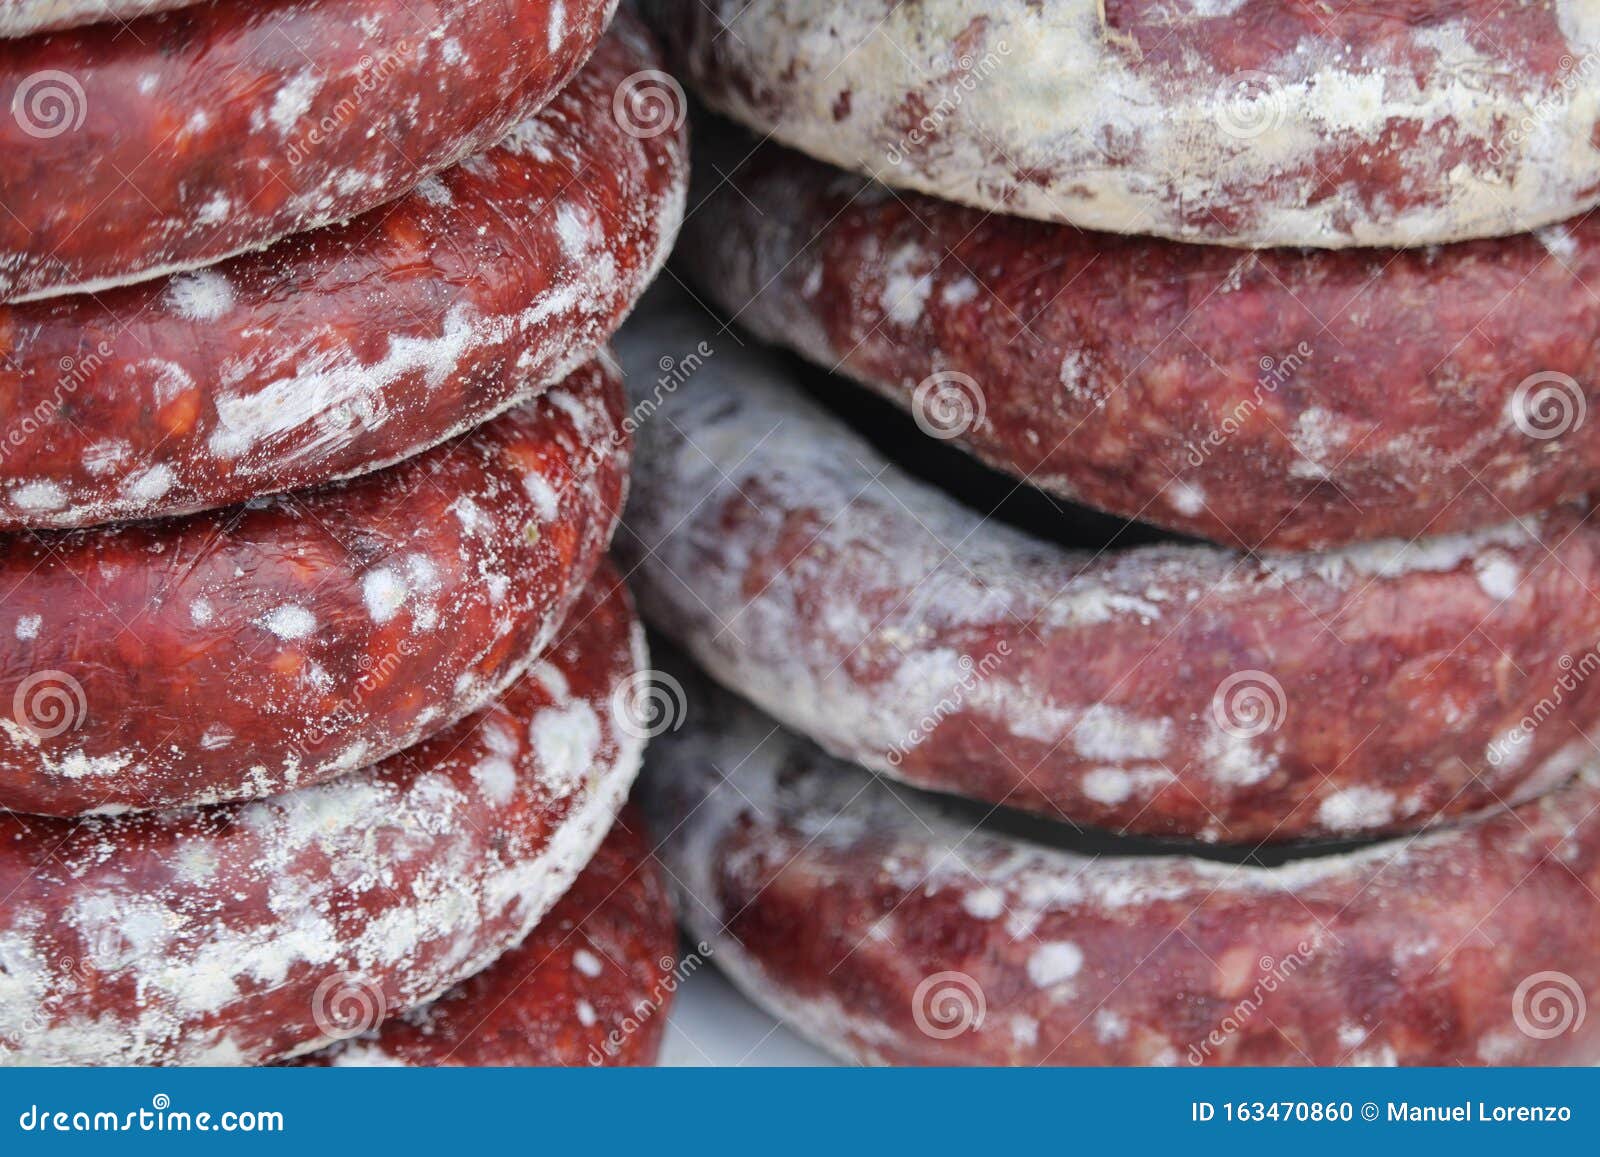 sausage of extraordinary beautiful color and delicious taste